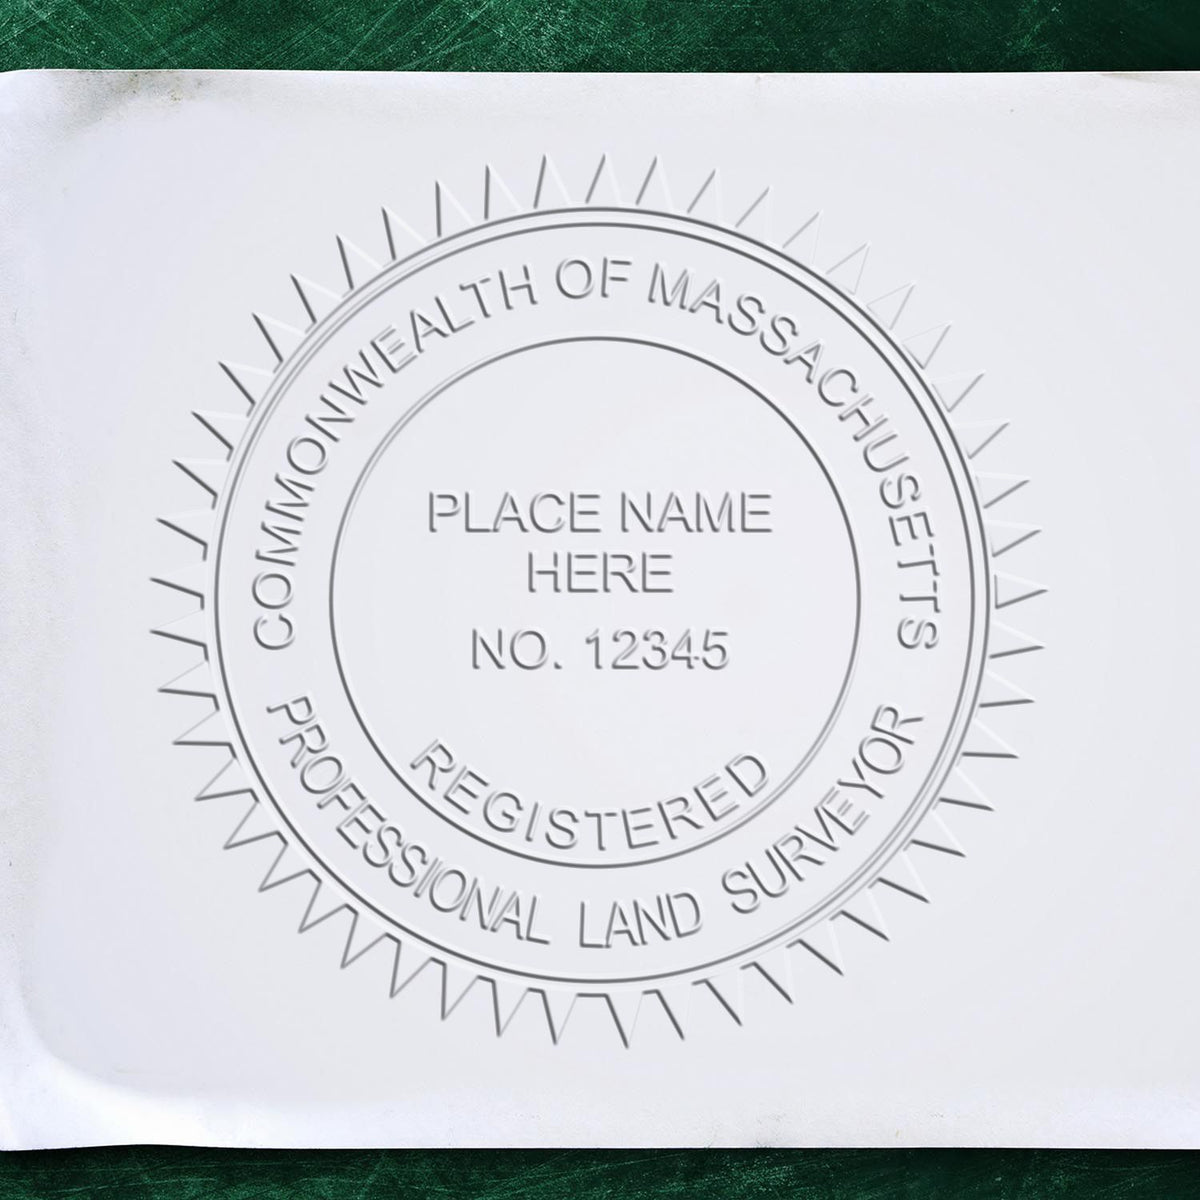 A lifestyle photo showing a stamped image of the Handheld Massachusetts Land Surveyor Seal on a piece of paper